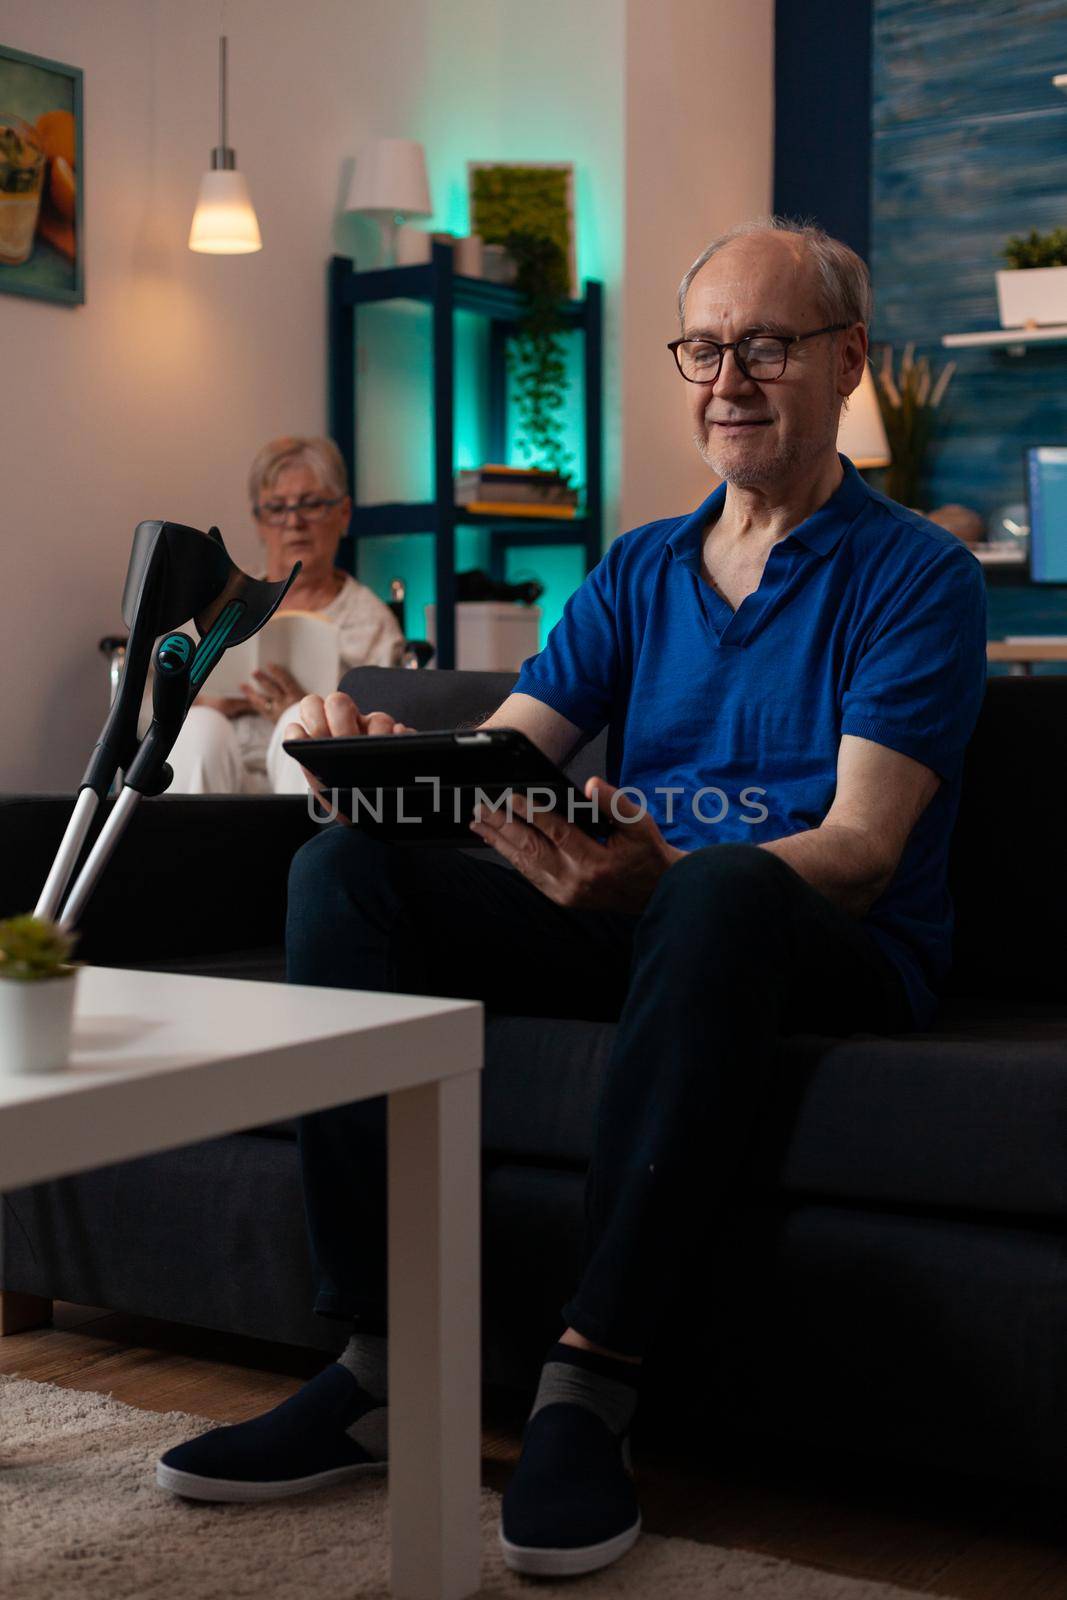 Couple of pensioners sitting at home with modern technology and healthcare support equipment. Caucasian man using digital tablet gadget on couch with crutches and woman in wheelchair